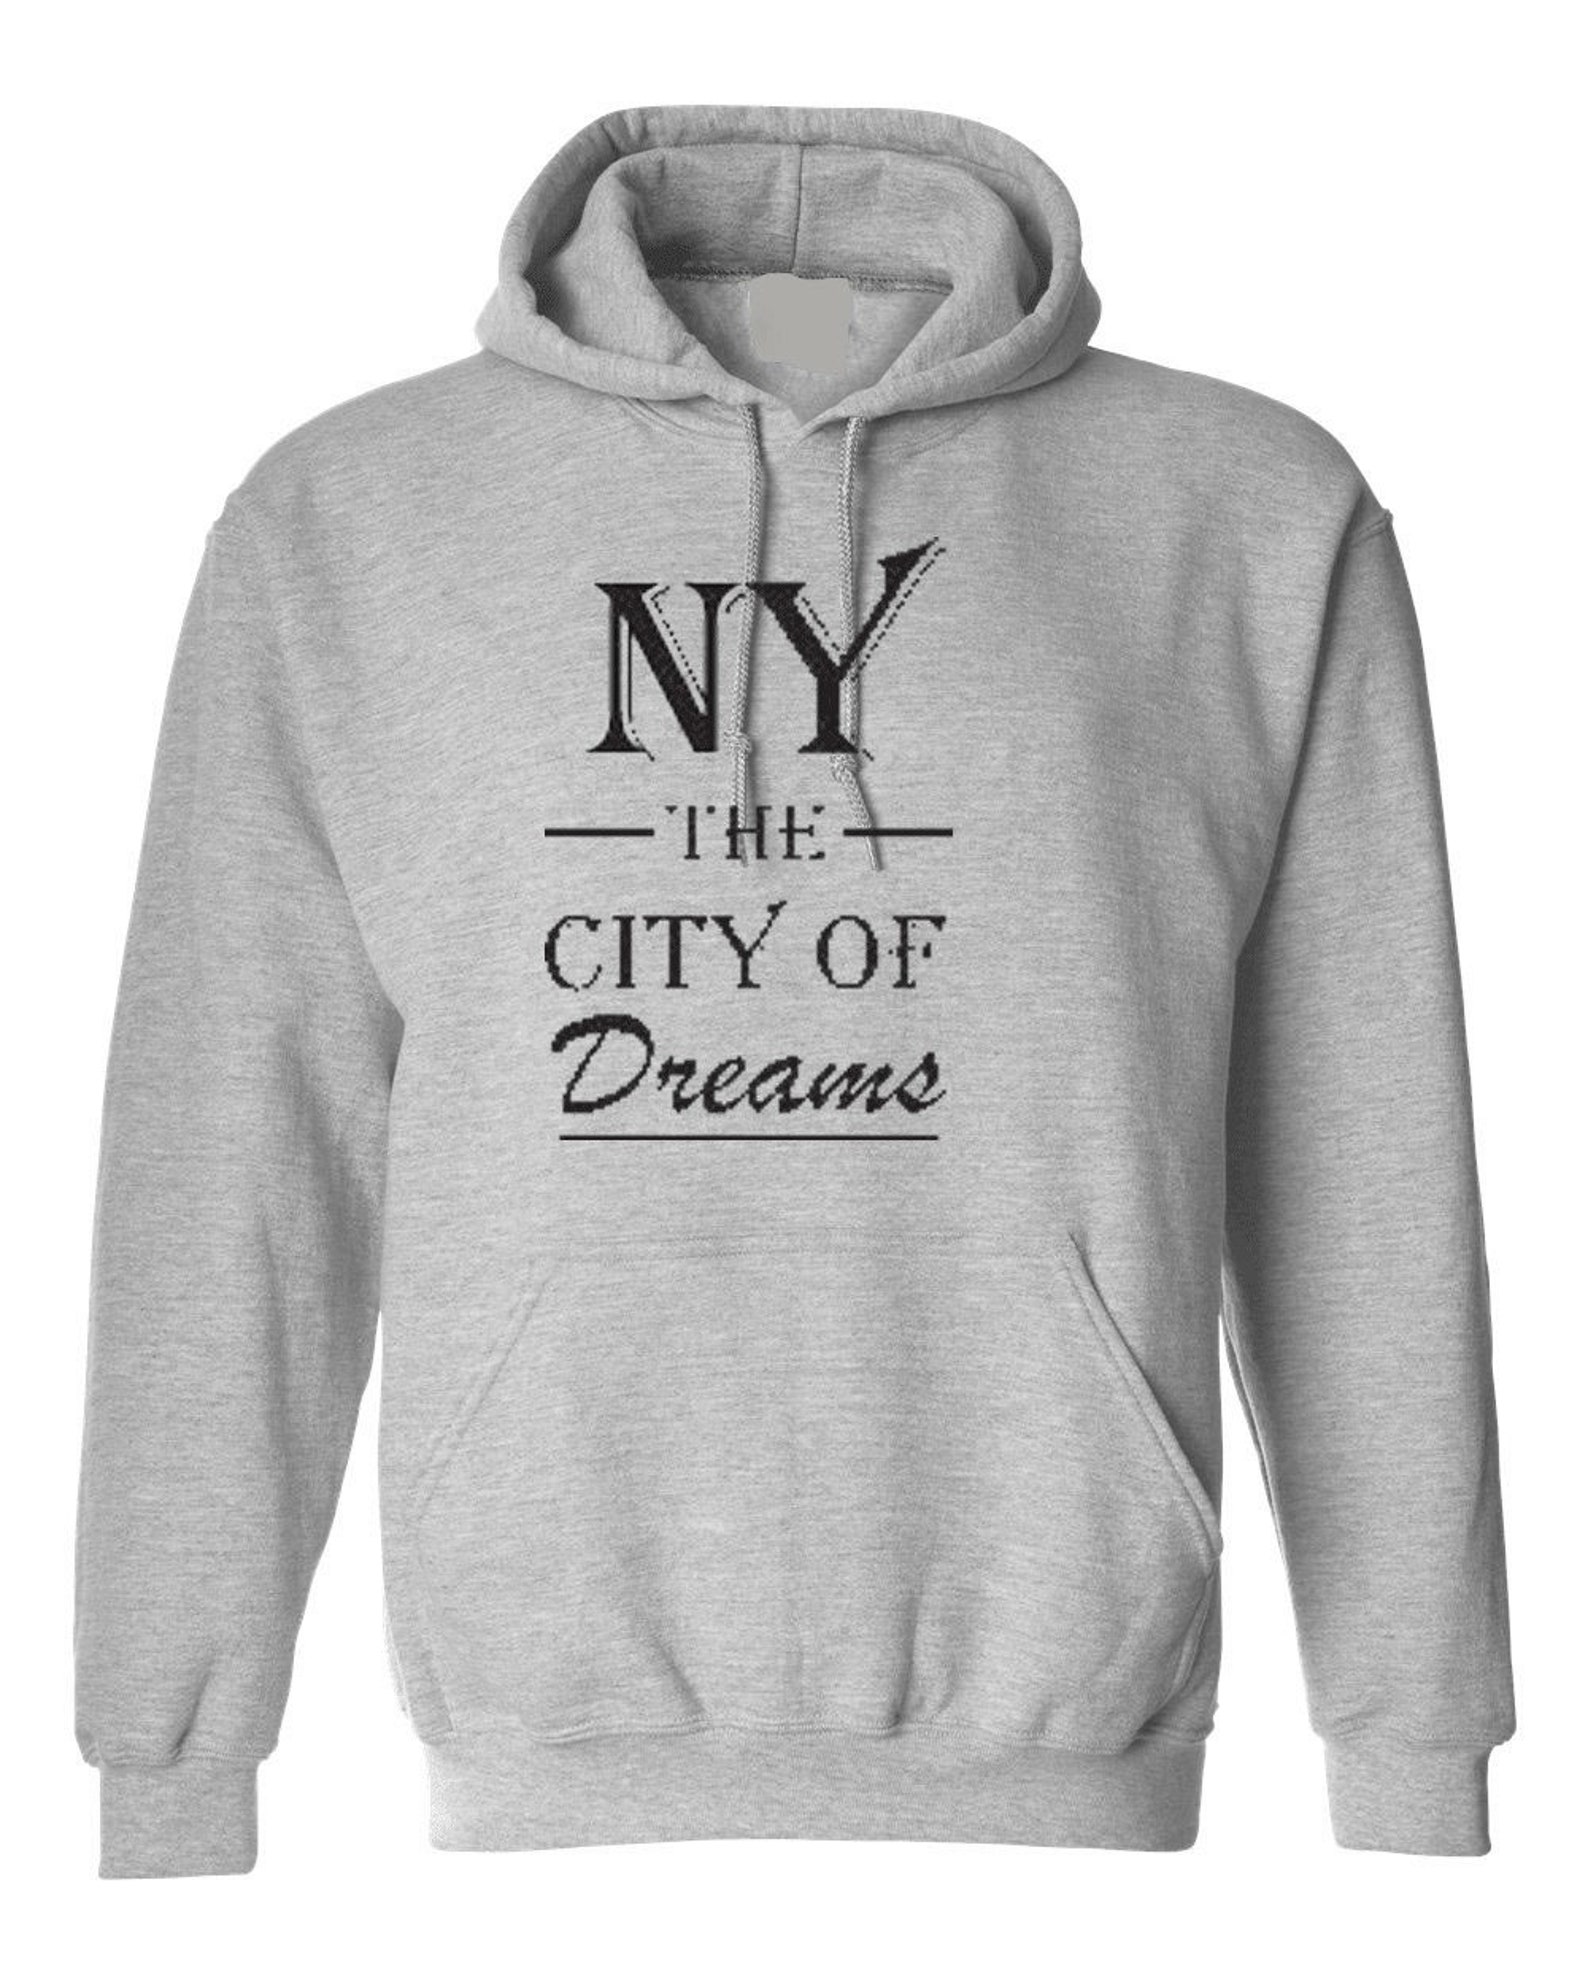 NY City of Dreams Fashion Hipster Trend Unisex Hoody Sweats à | Etsy